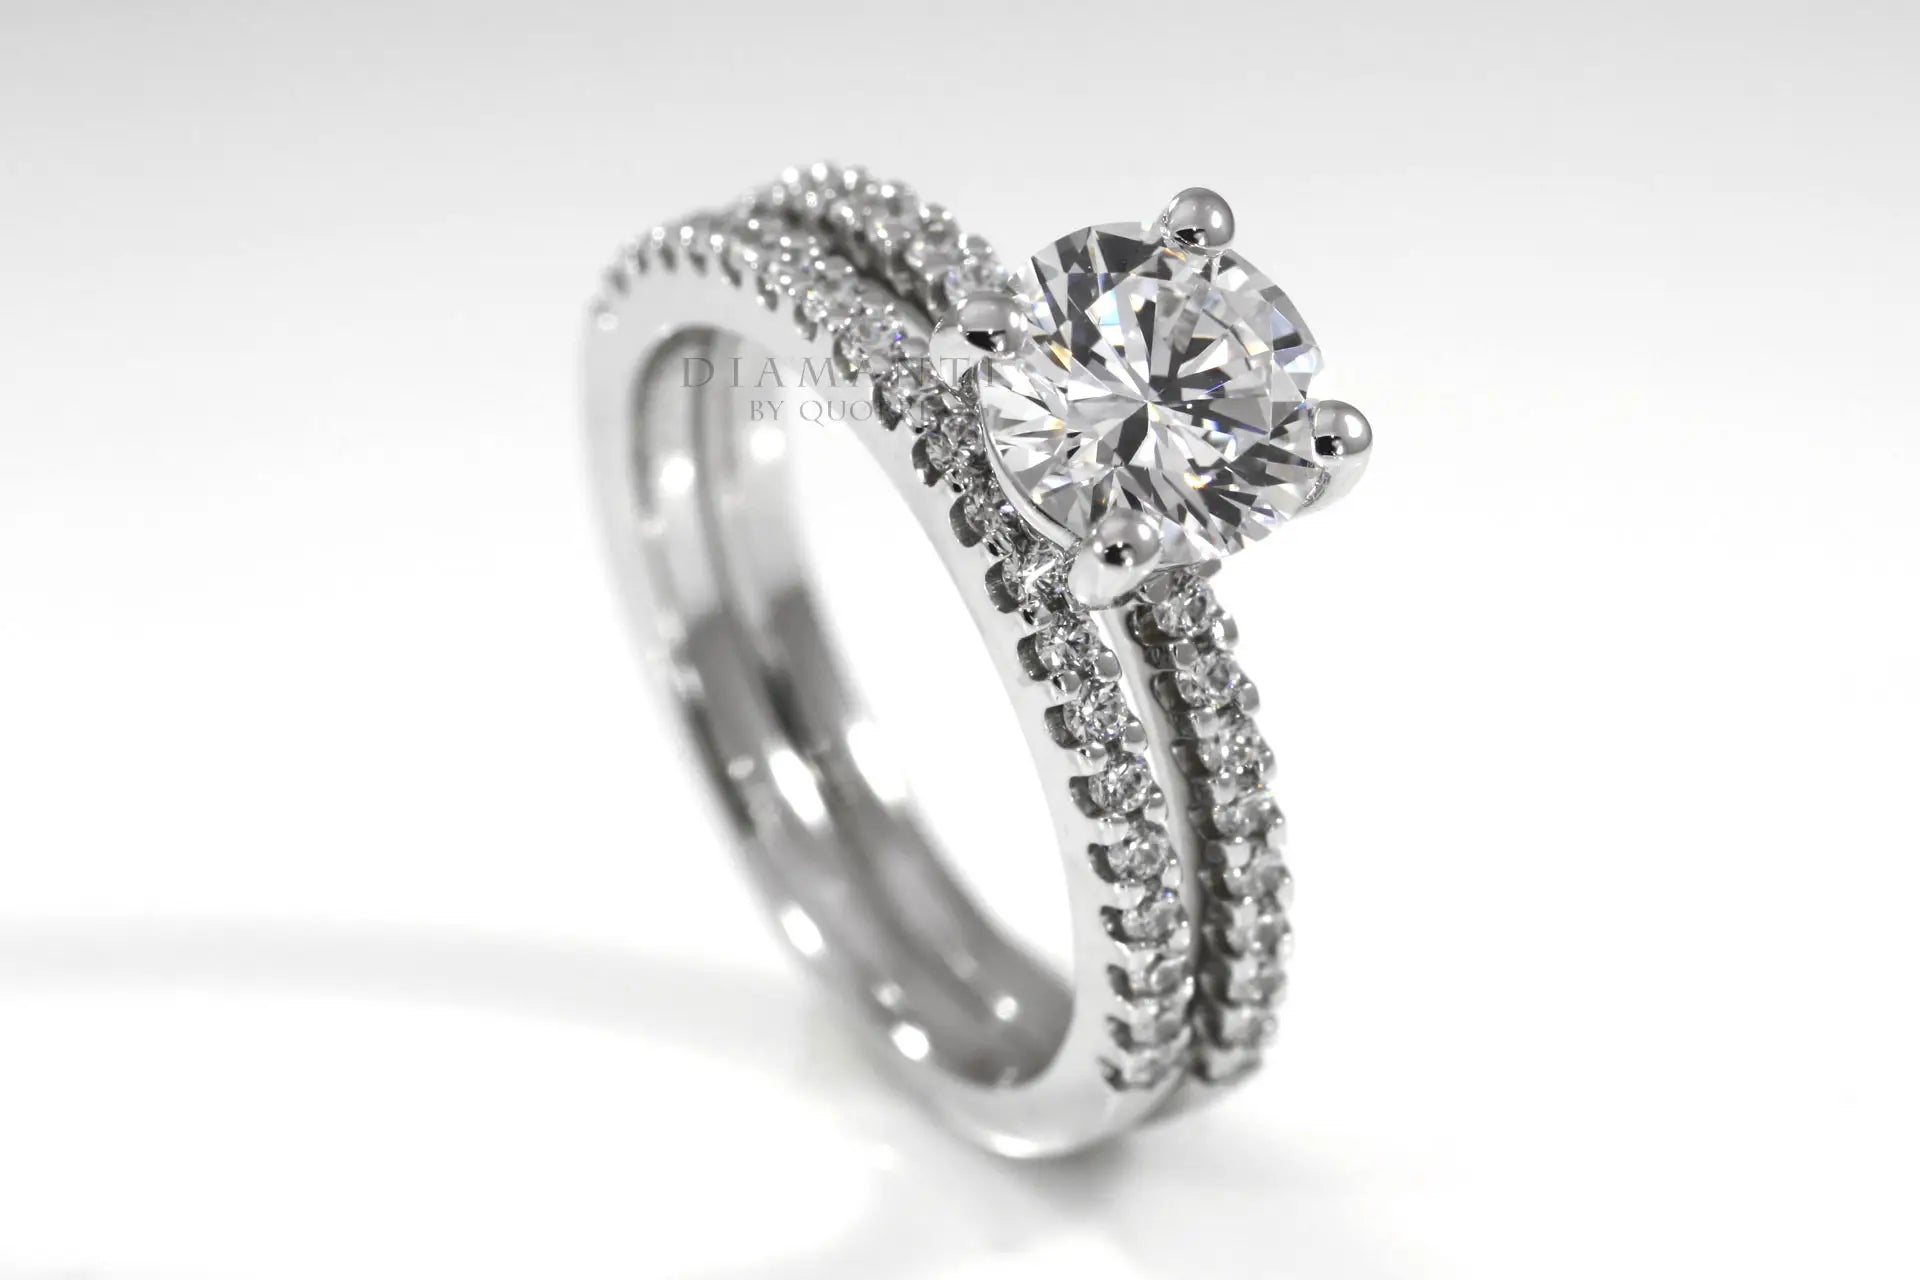 18k white gold accented 1ct round lab diamond engagement ring and band Quorri